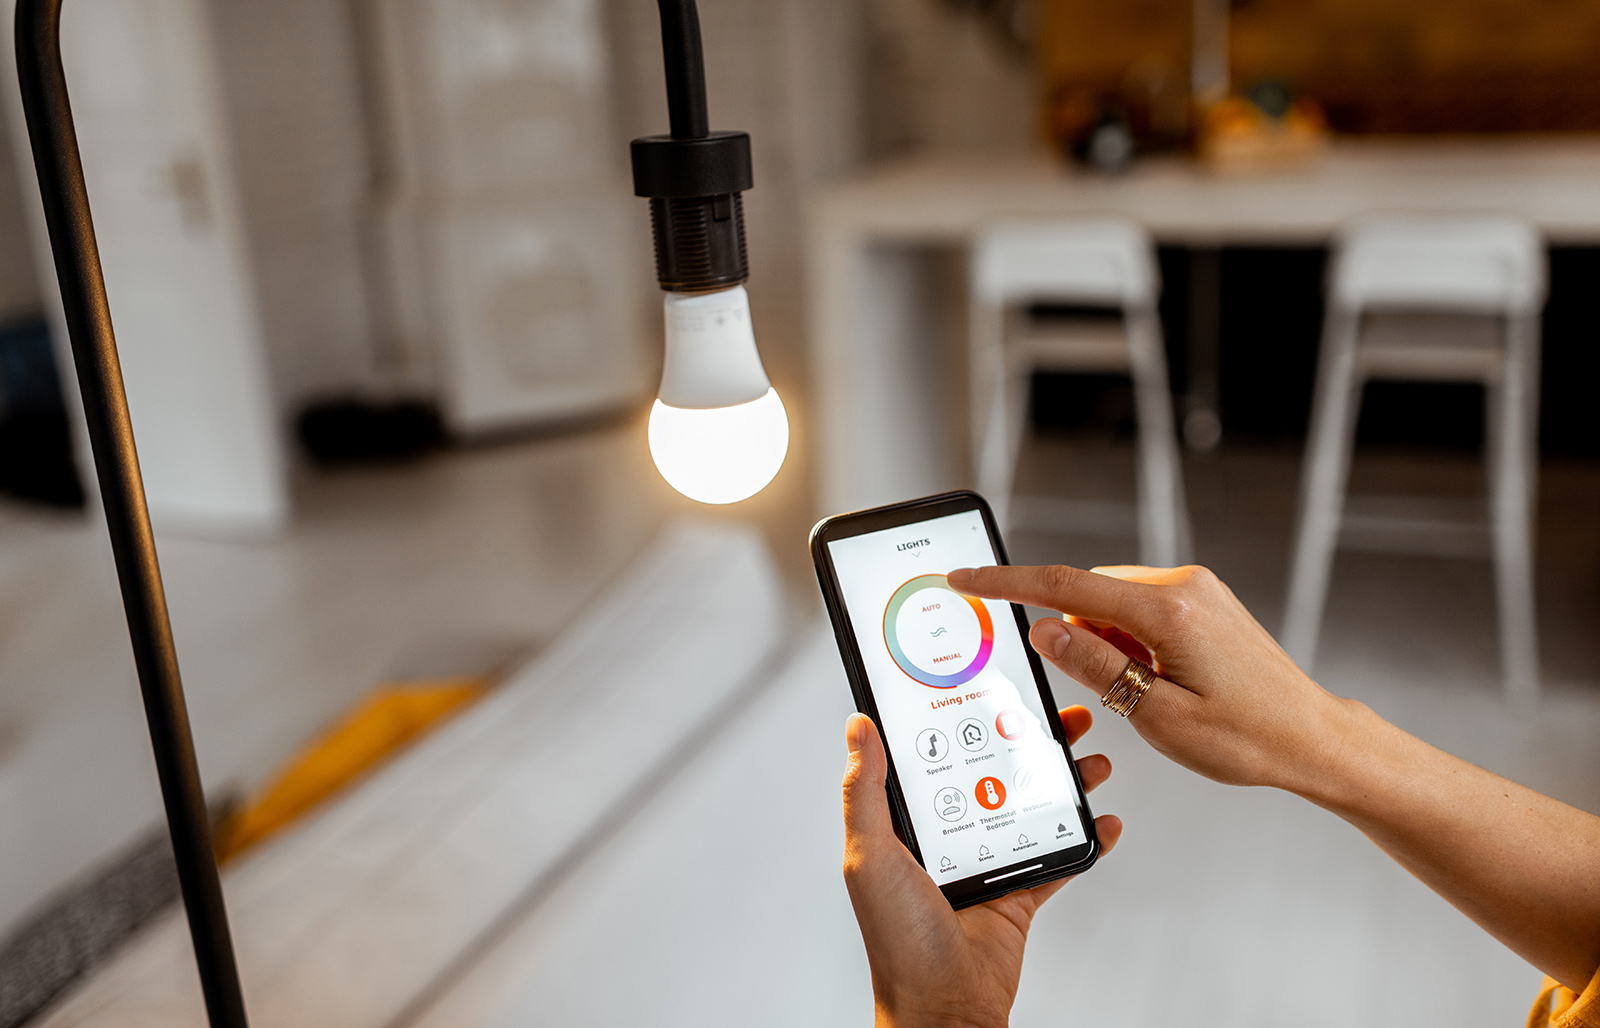 How are these LED smart bulbs only $8.75 when Philips Hue bulbs cost